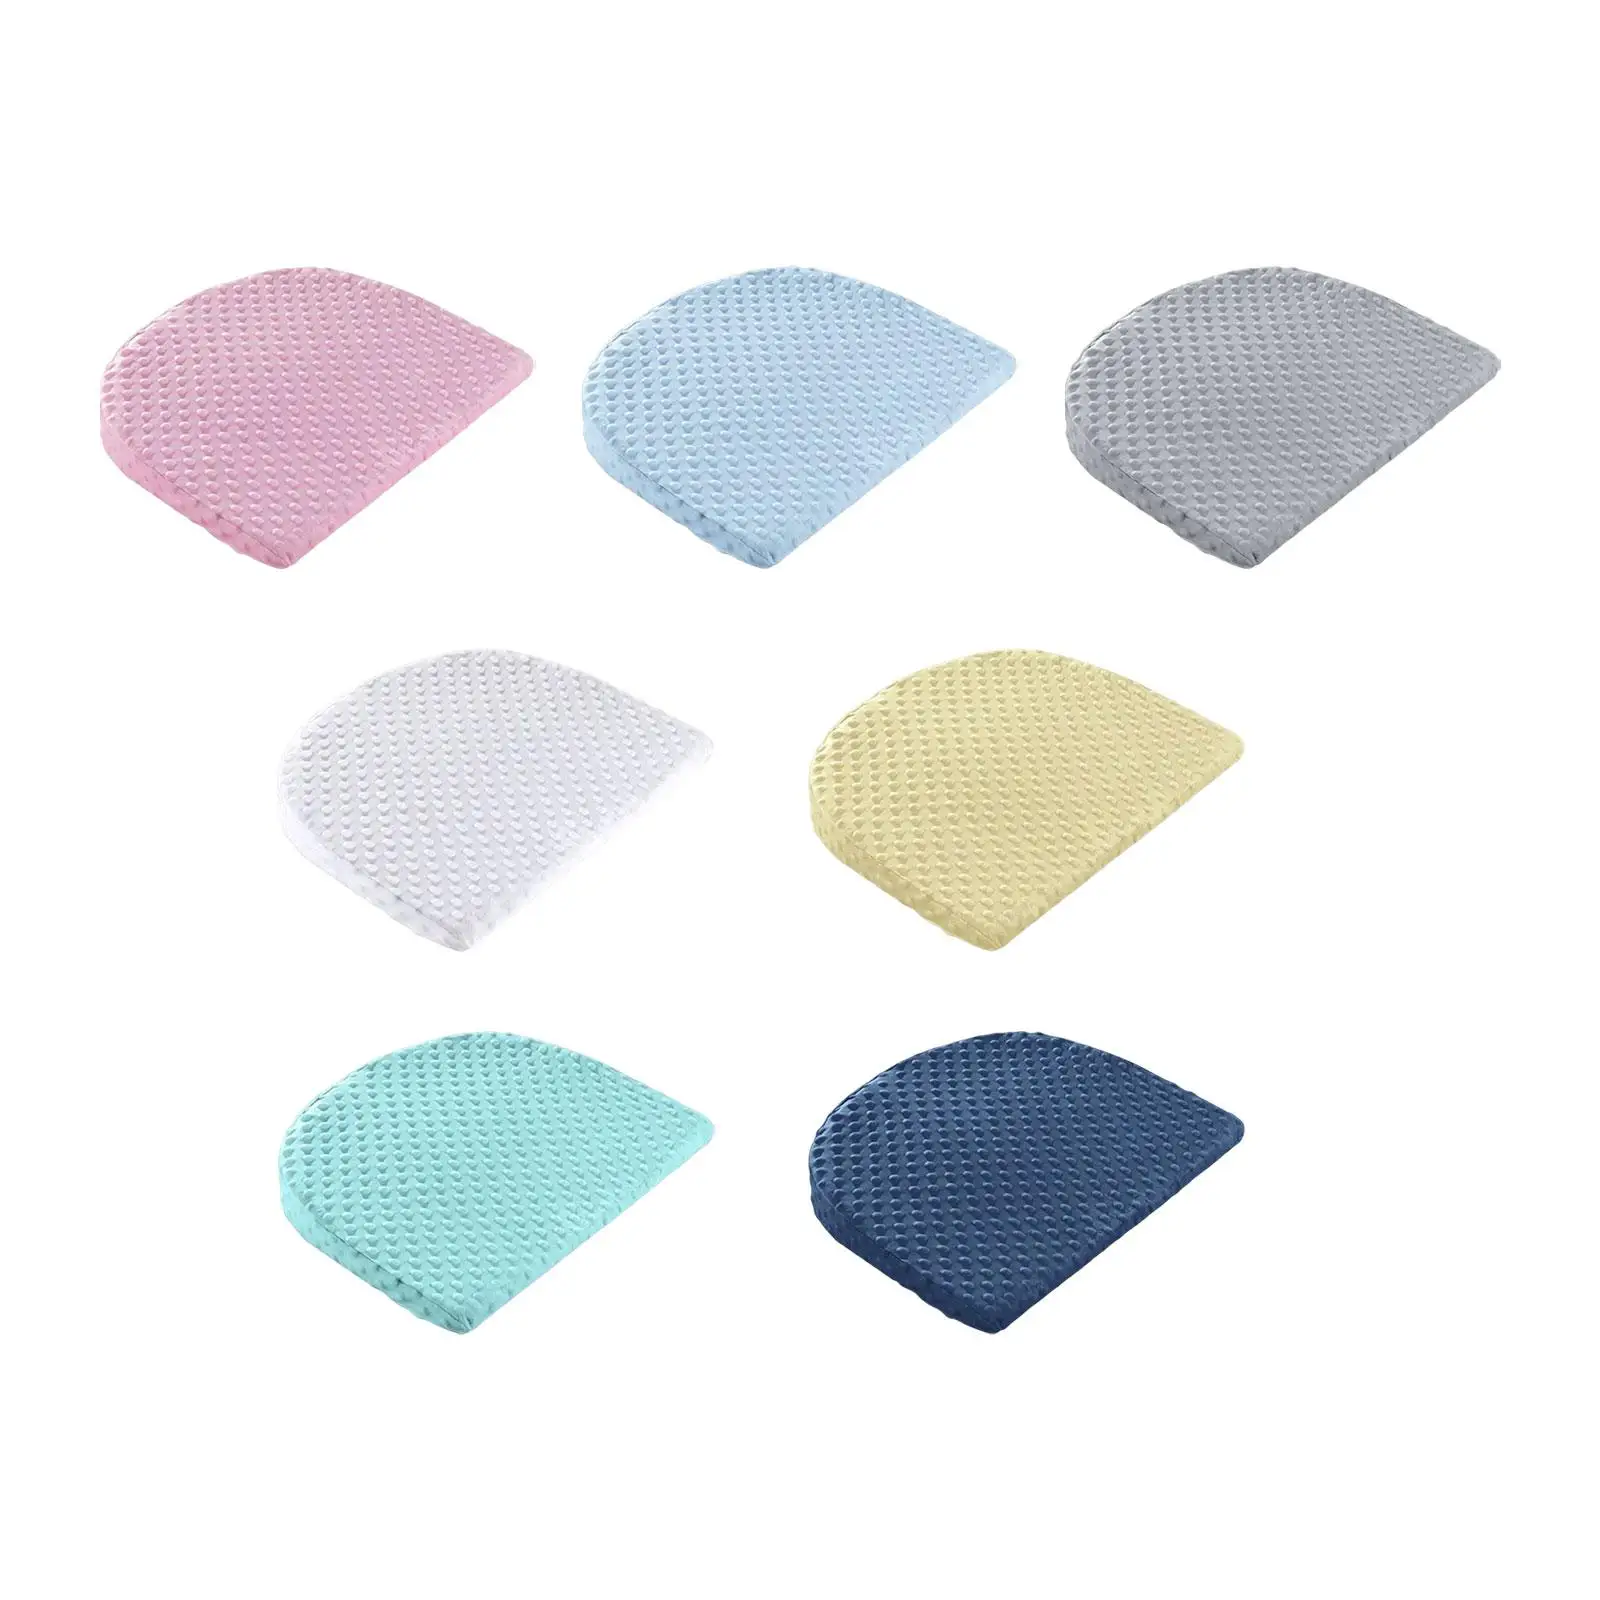 Baby Wedge Pillow Anti Reflux Anti Spit Milk Removable Cover Elevated Support Pillow for Crib Nursing Bed Cot Sleep